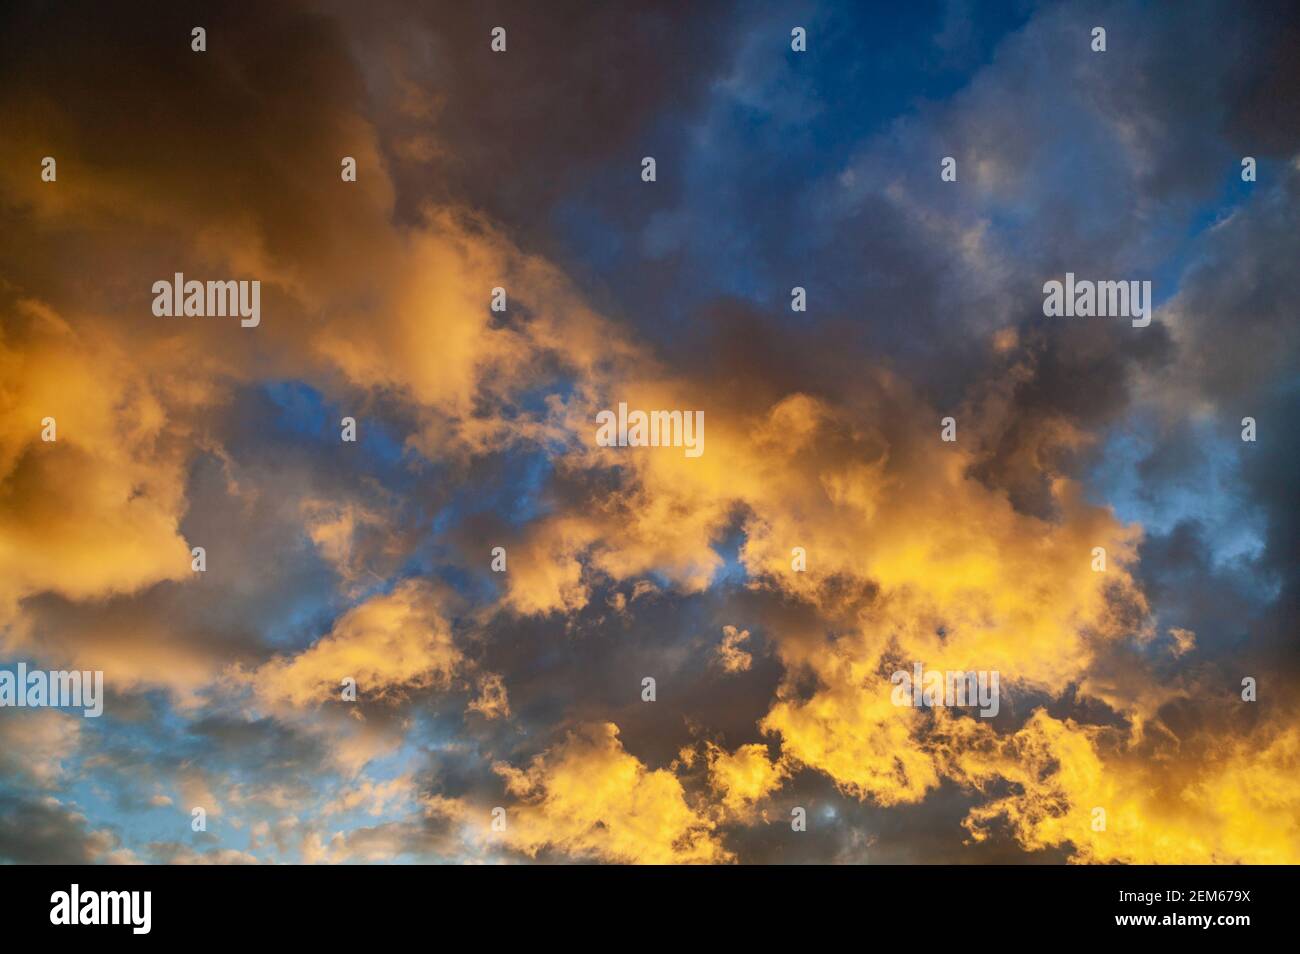 Near sunset sky with golden evening clouds and some blue sky. Stock Photo